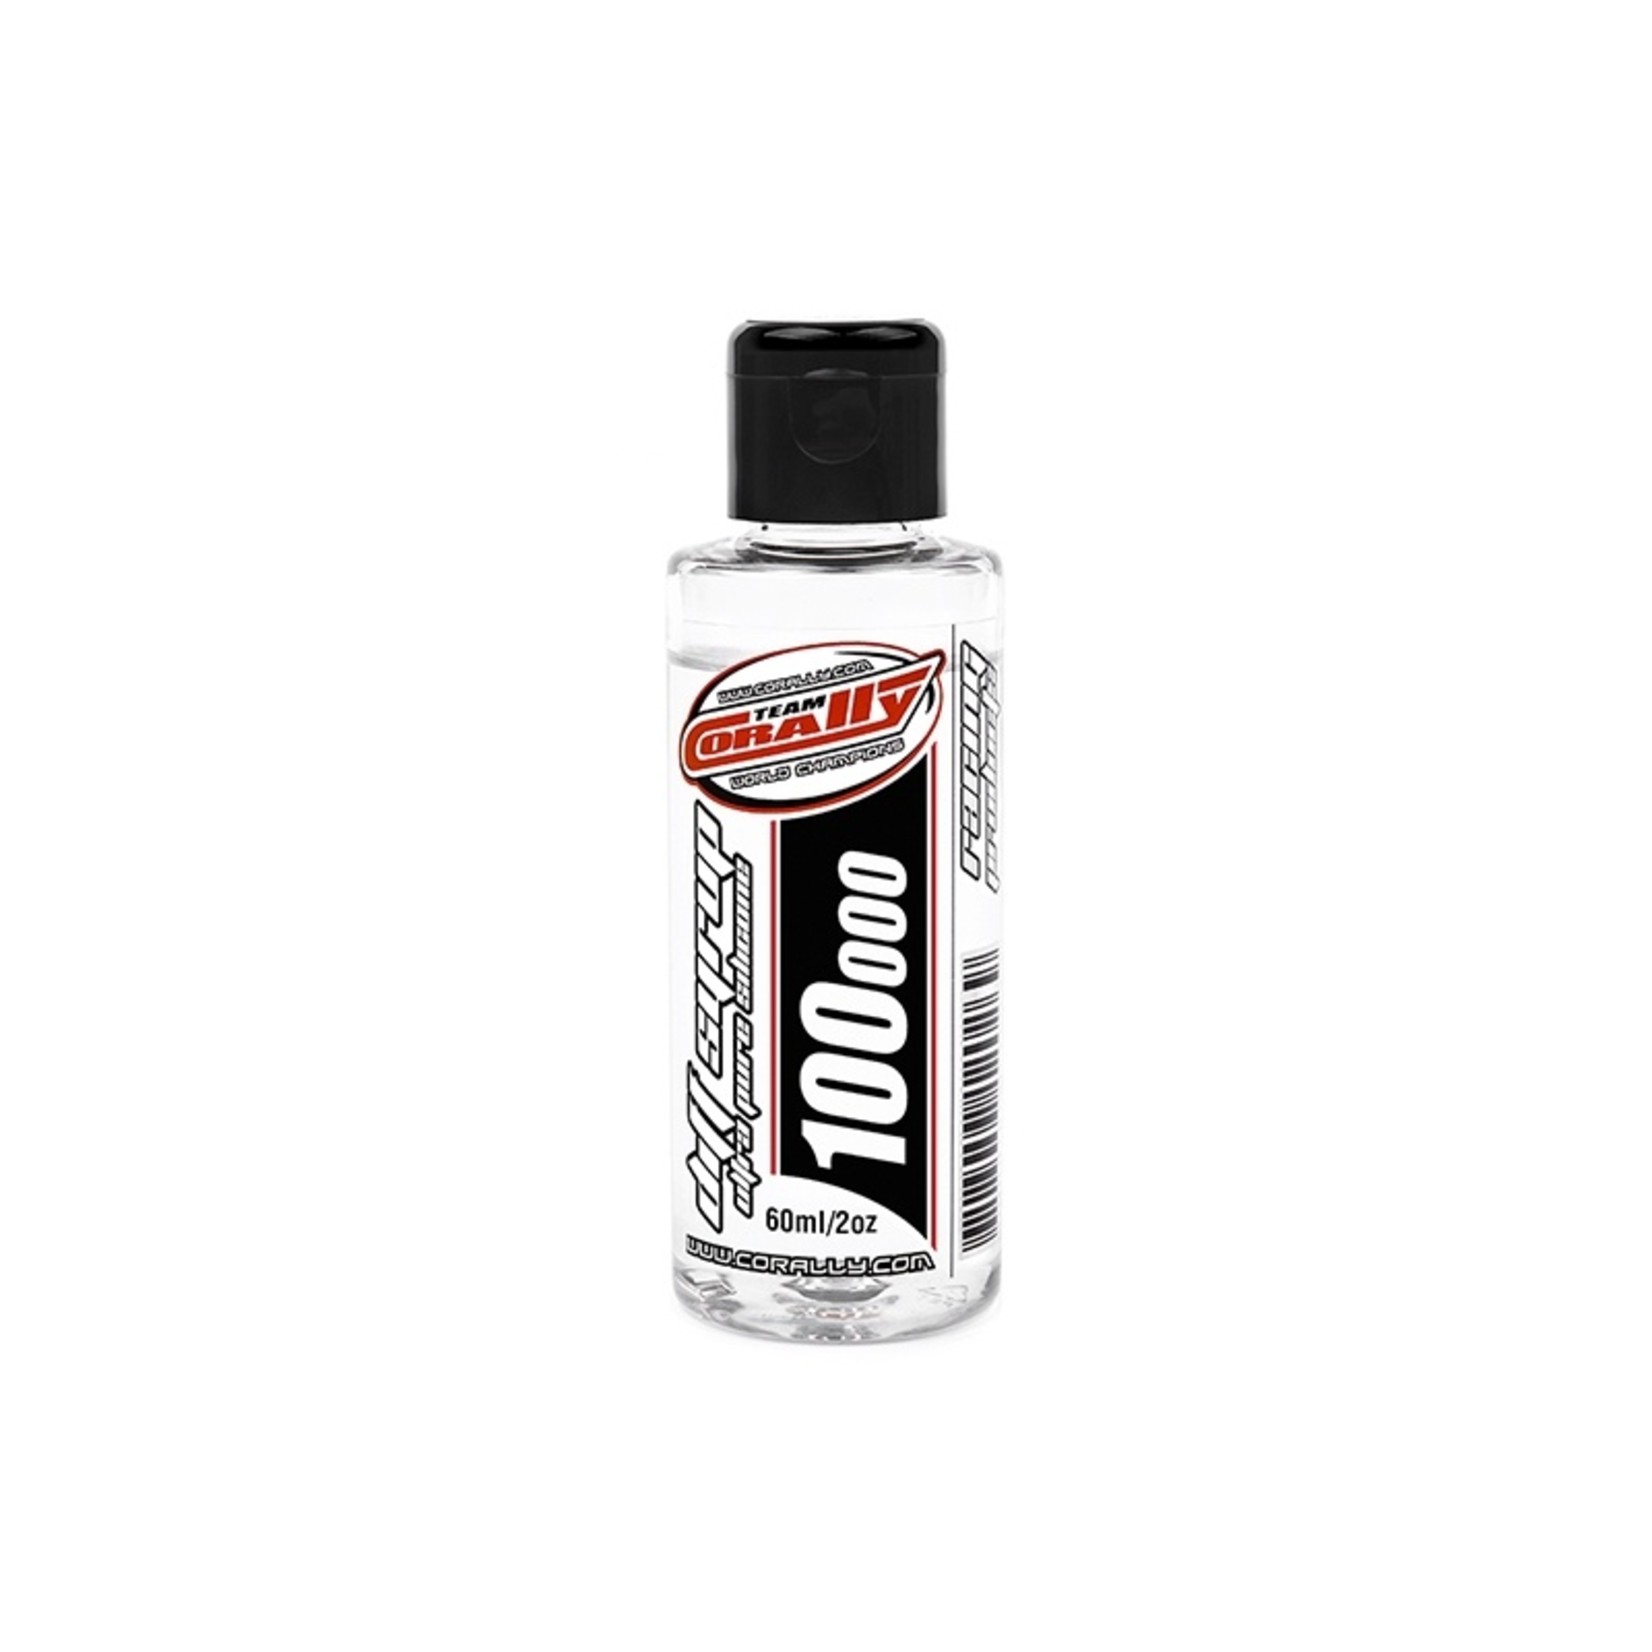 Corally (Team Corally) Ultra Pure Silicone Diff Oil (Syrup) - 100000 CPS - 60ml